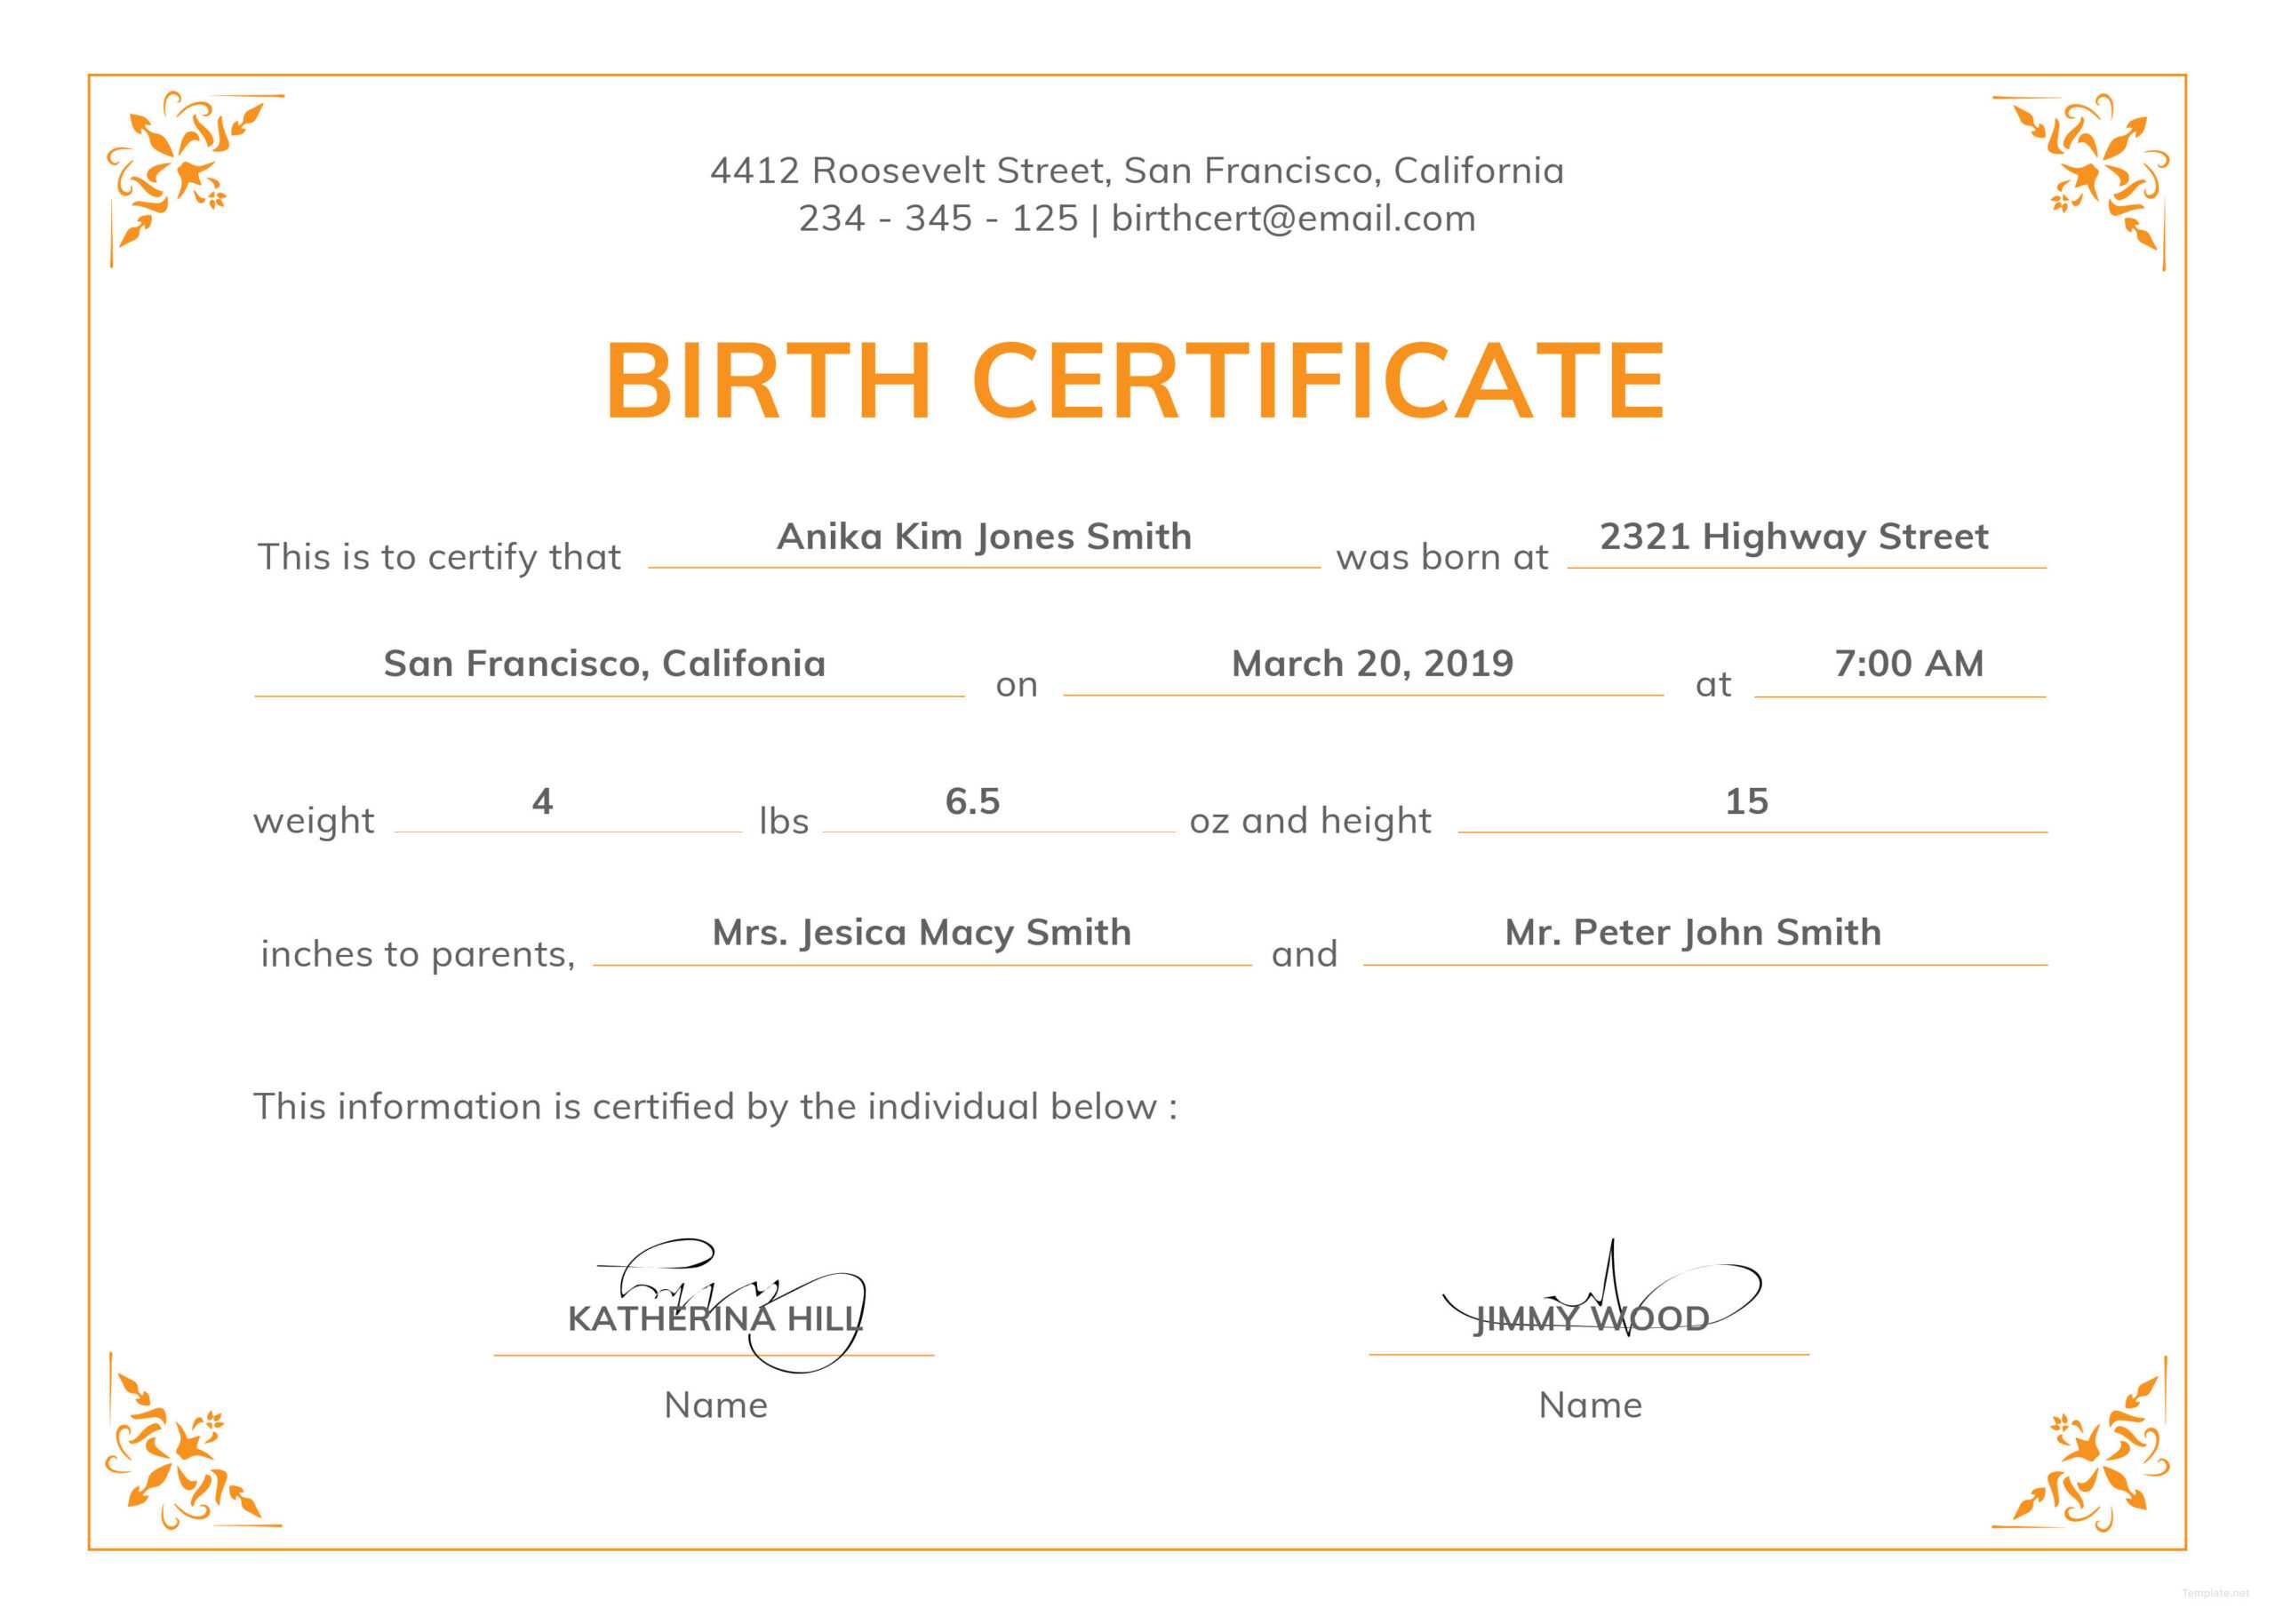 Can Make A Delivery Certificate Crucial | Gift Certificate With Regard To Official Birth Certificate Template